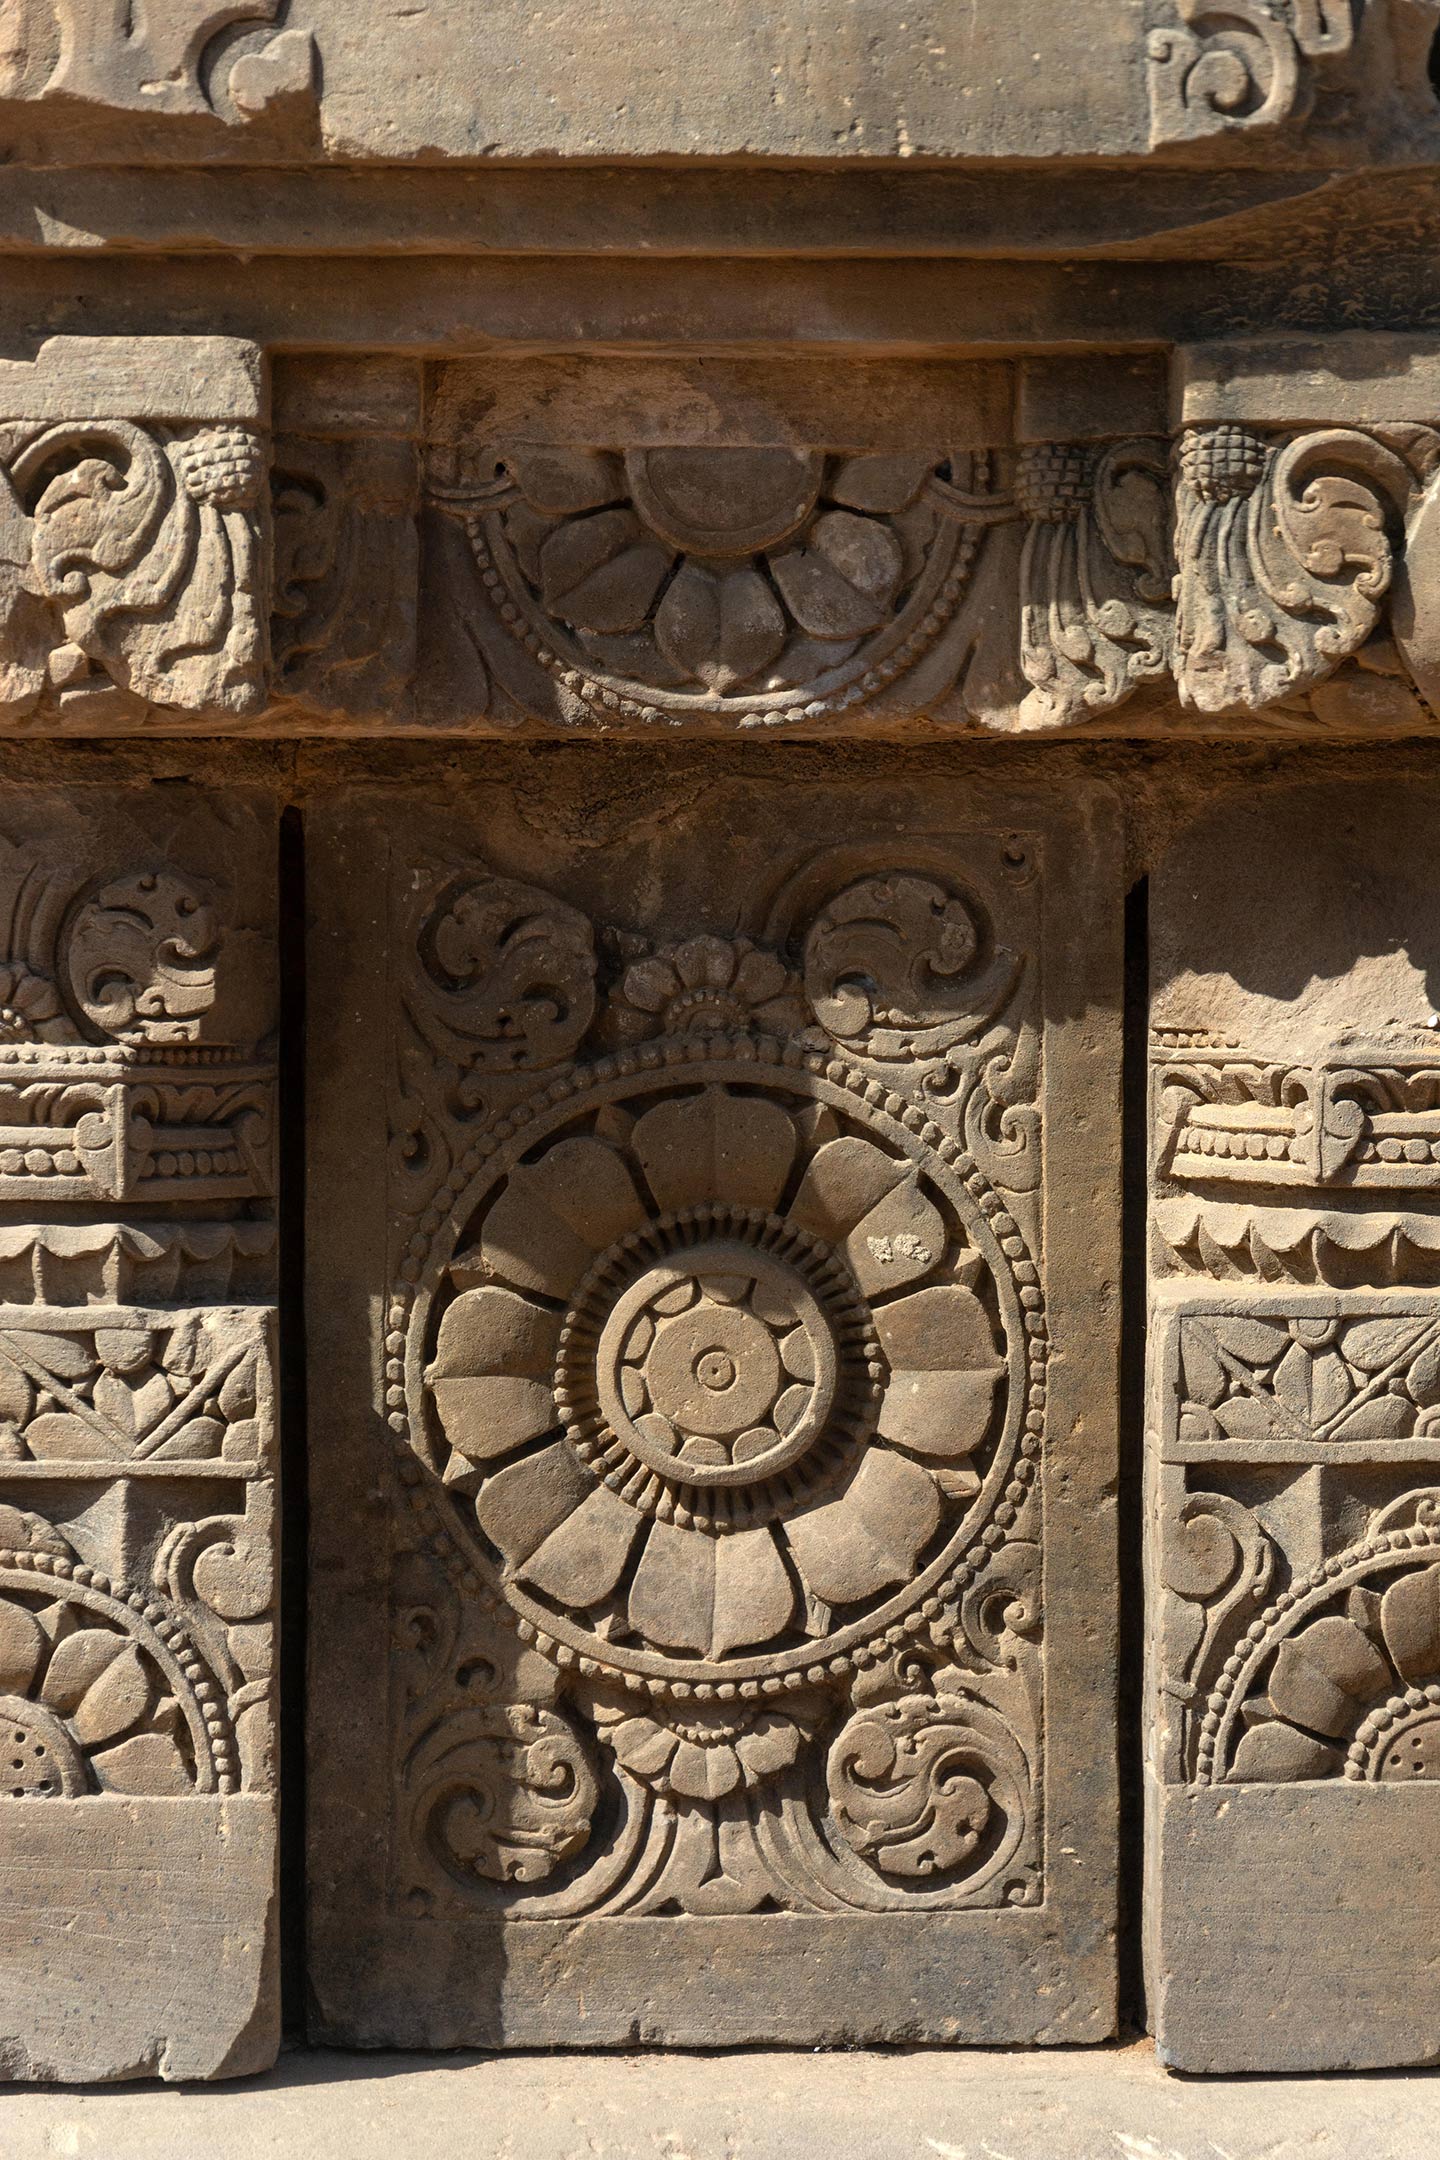 The plaque here features the ashtadal kamal (lotus with eight petals). The plaques are separated by squat pillars which have a square base, an octagonal shaft, and a square capital. The pillars are decorated with ardha padma (half lotus) and kalpa lata (creeper) motifs.